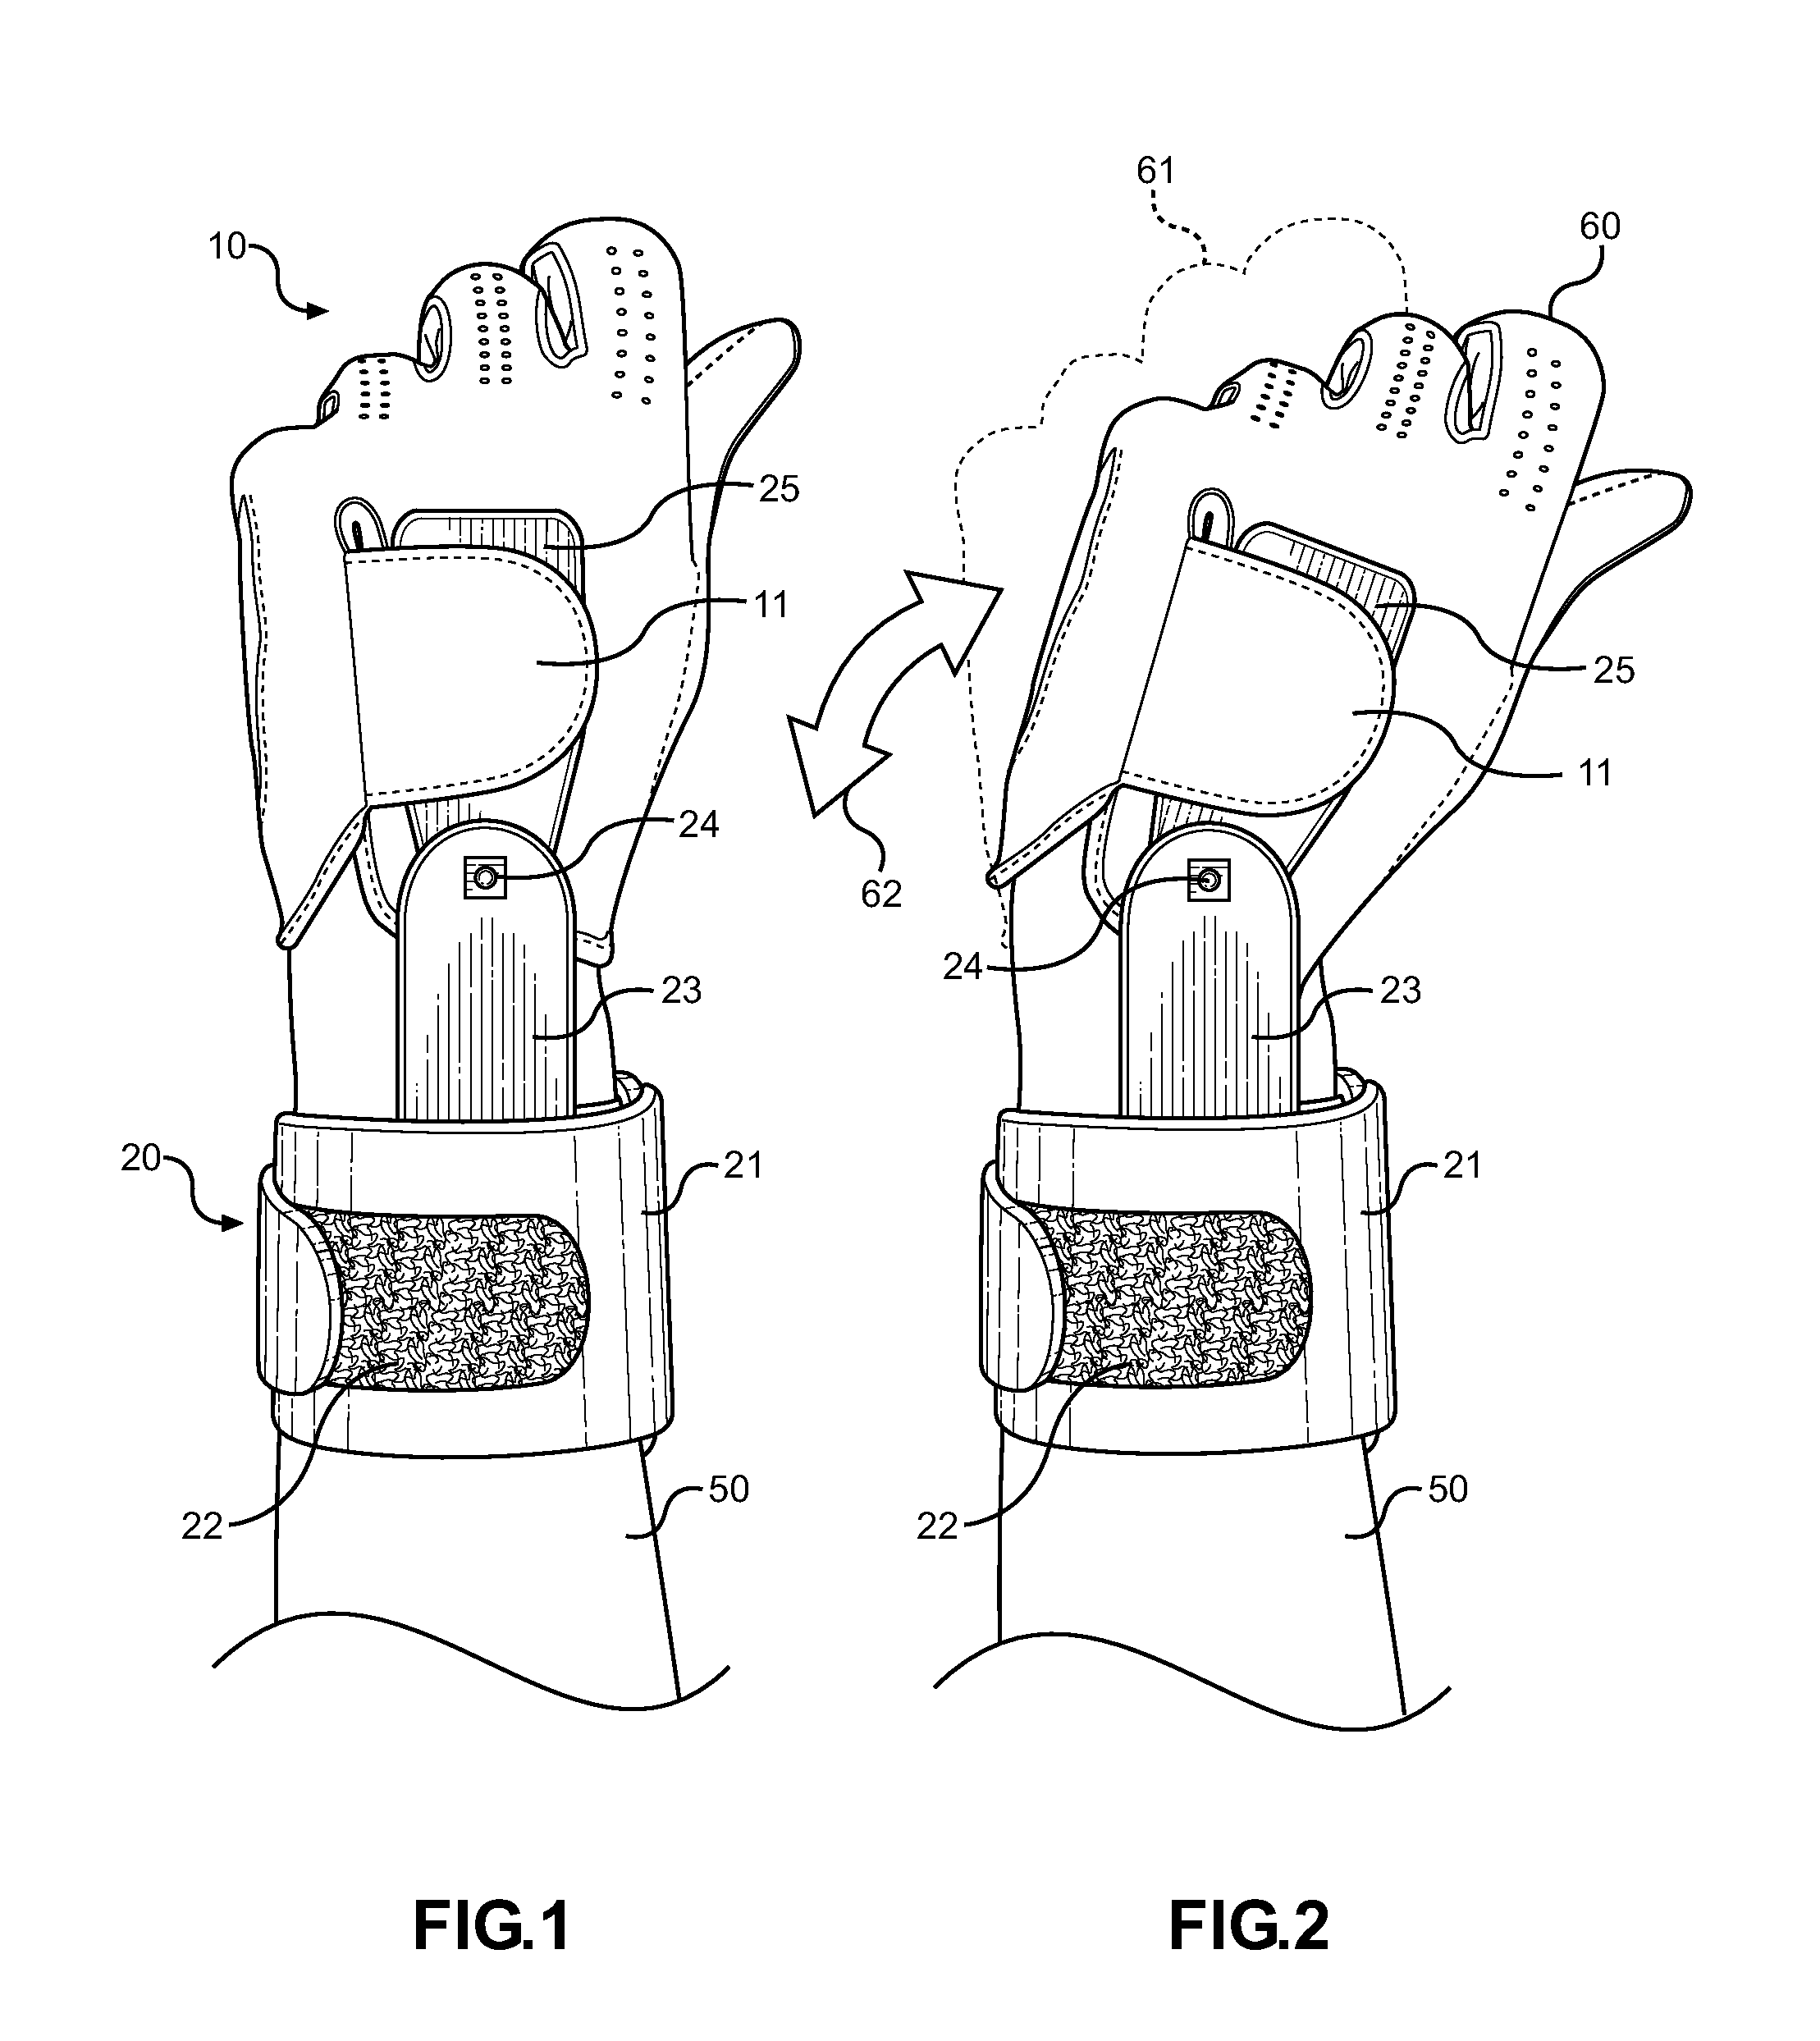 Wrist Training Device for a Golf Swing and Putting Stroke